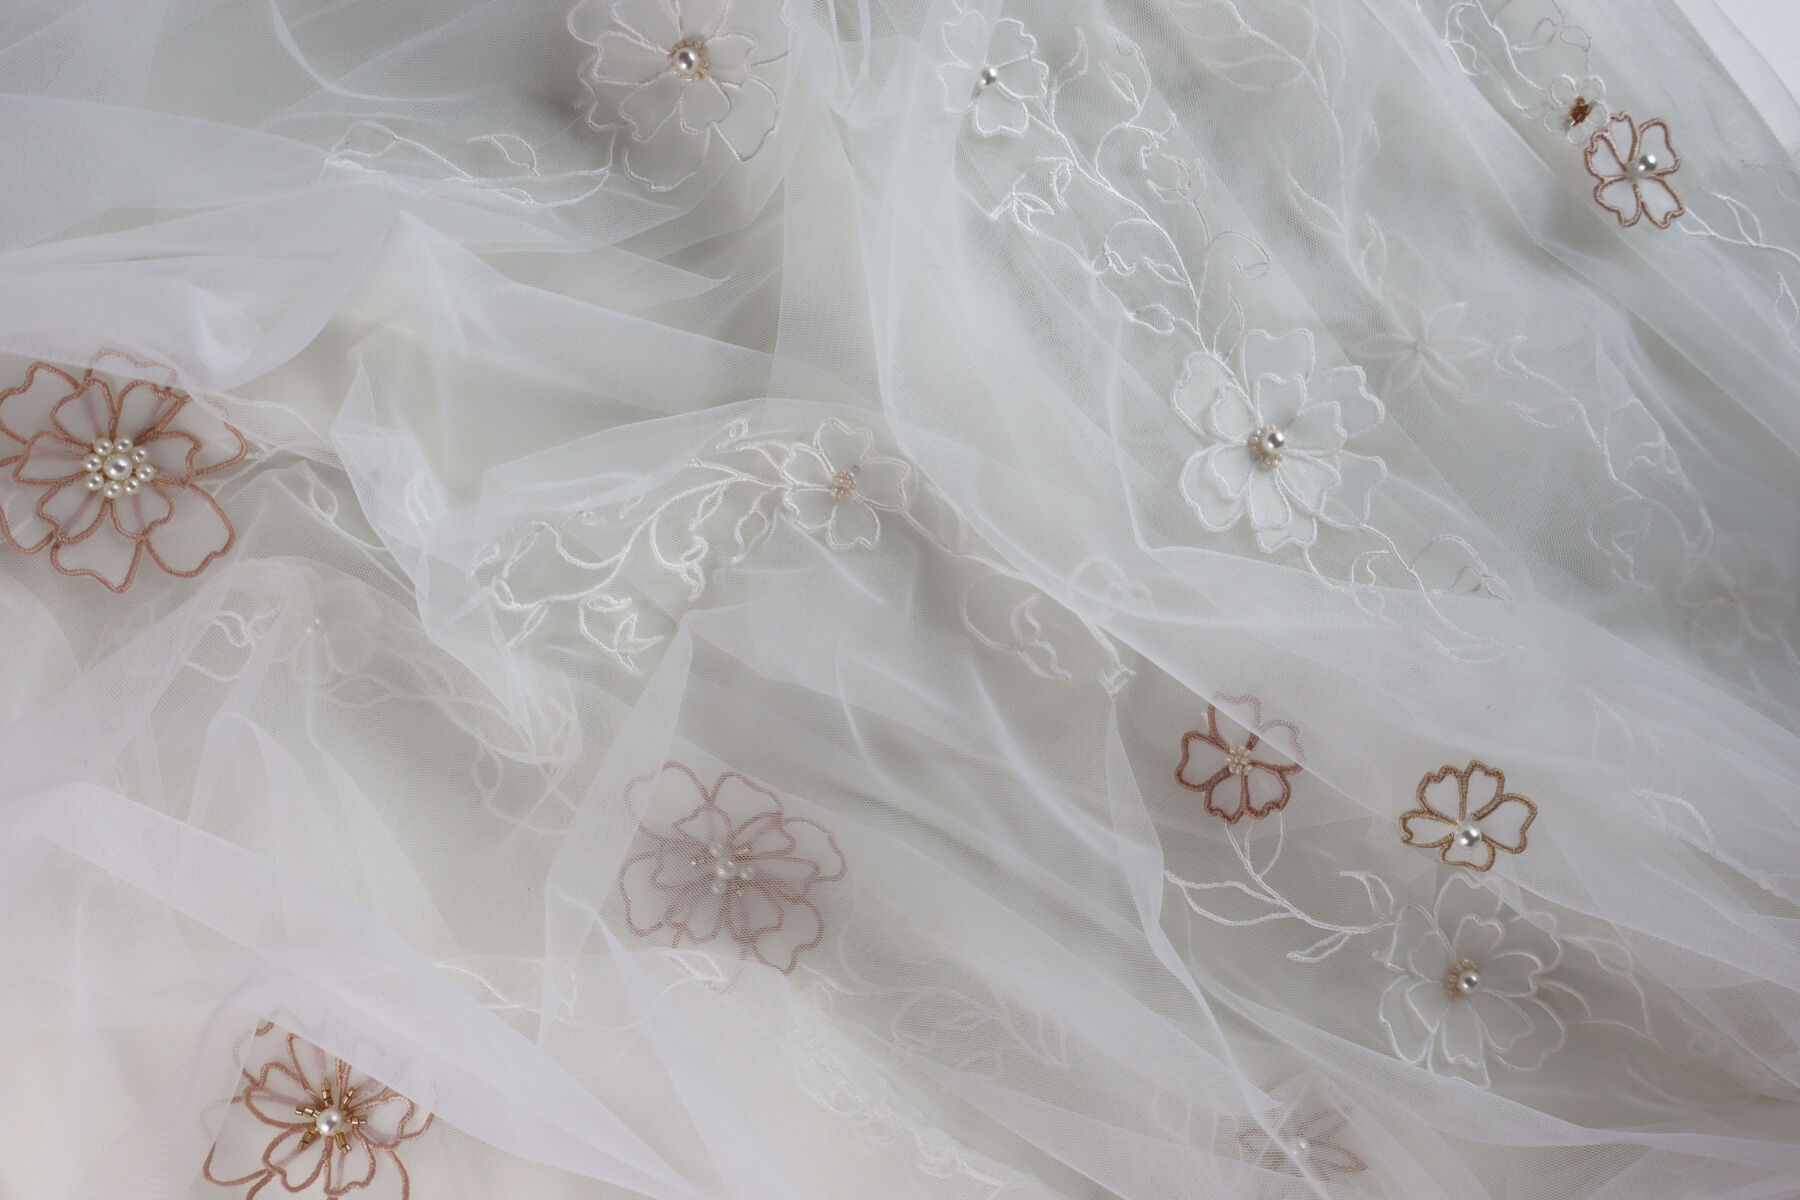 Detail Image of an ivory wedding veil by Natasha Nicole Studio, featuring an array of hand designed embroidered flowers with beaded centres and pearls.